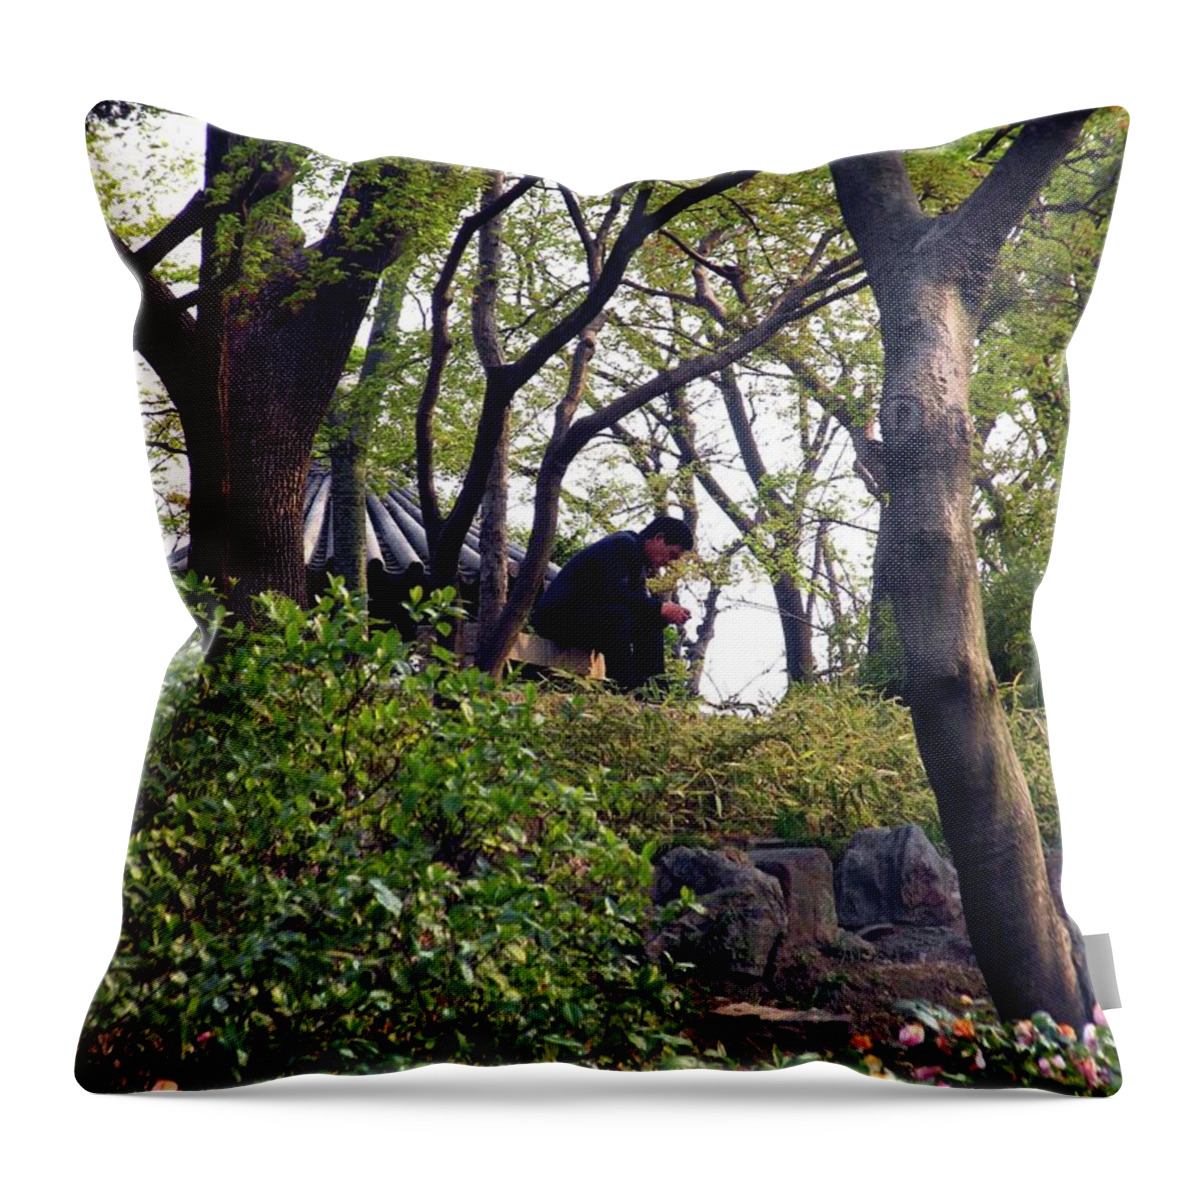 China Throw Pillow featuring the photograph Suzhou Gardens in Thought by Marti Green